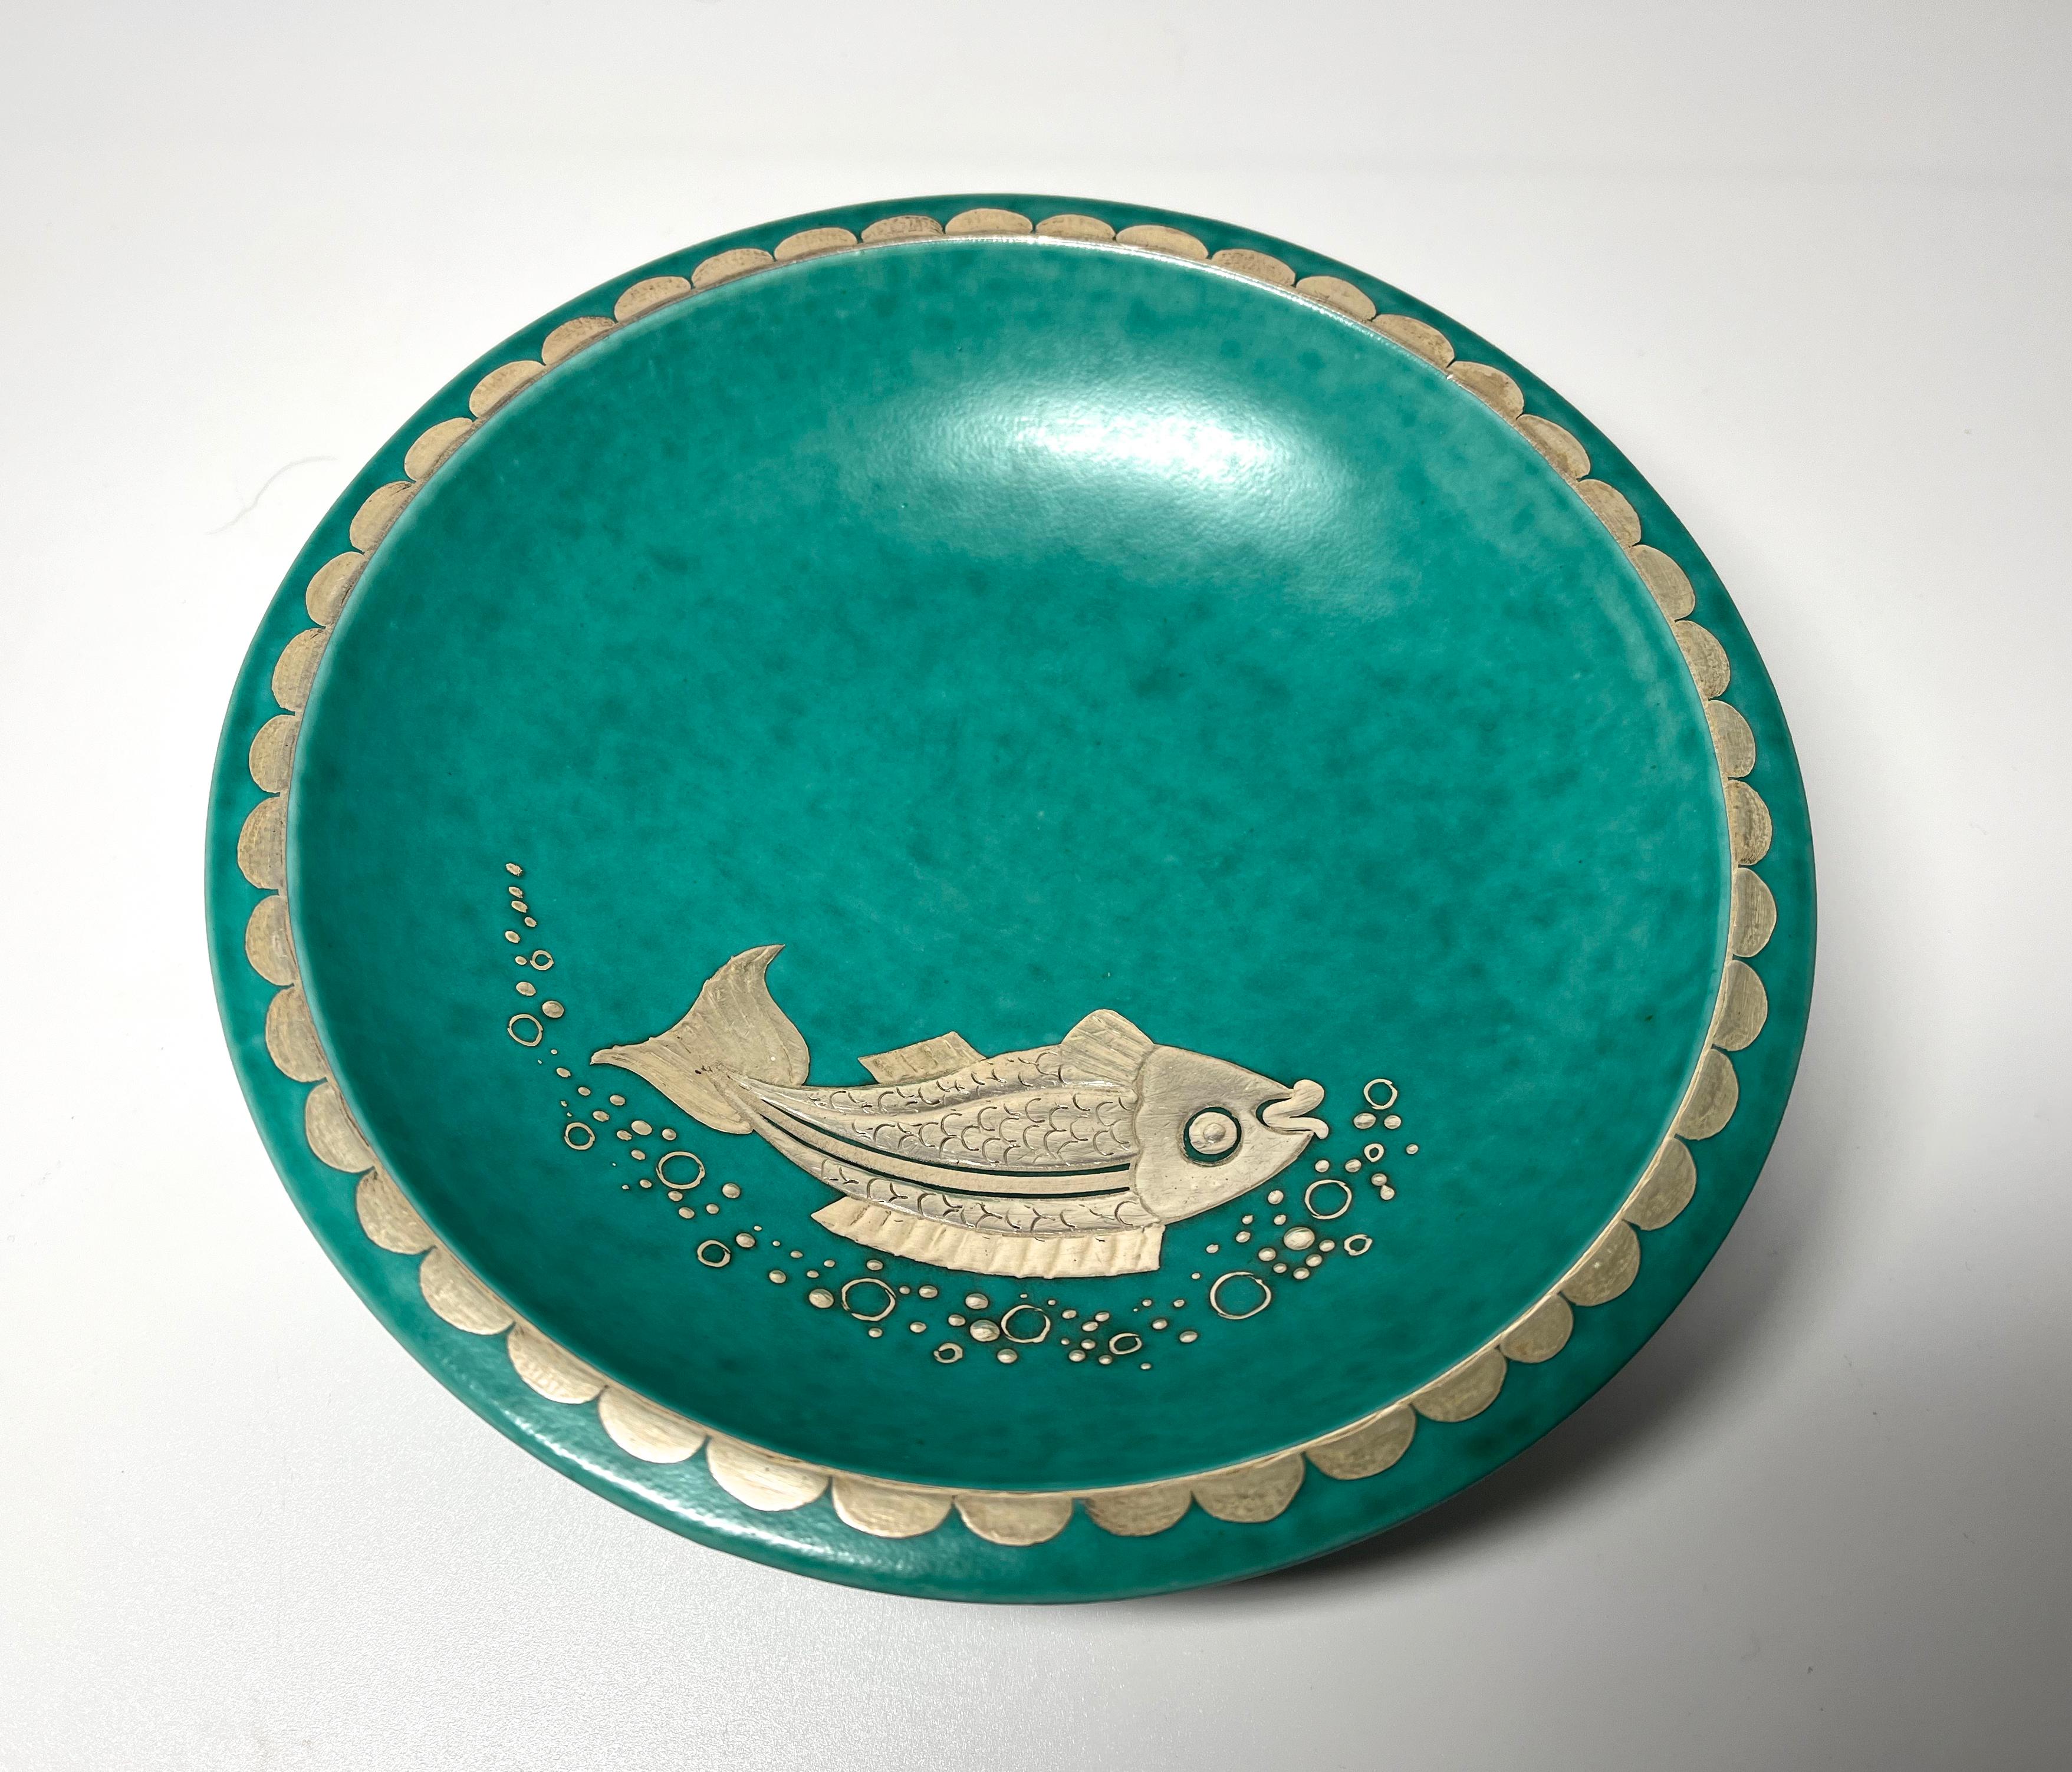 An expressive silver fish adorns this elegant footed dish by Wilhelm Kage for Gustavsberg, Sweden. Superbly decorated with an amusing stylised fish and banding to rim and foot in applied silver
Circa 1960's
Stamped Gustavsberg Argenta on reverse